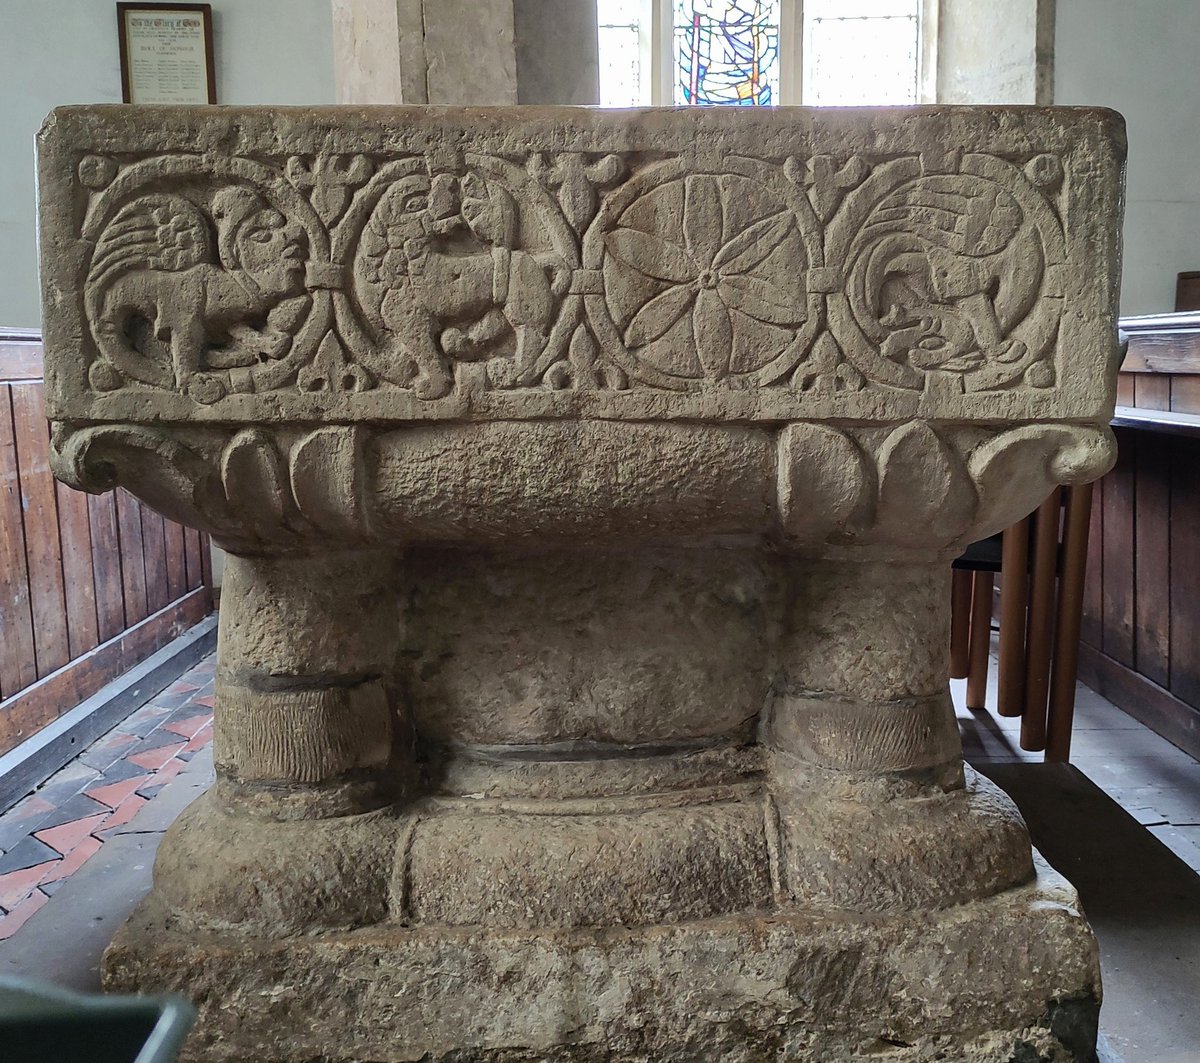 Early Norman font at Newenden. #Kentchurches #FontsonFriday